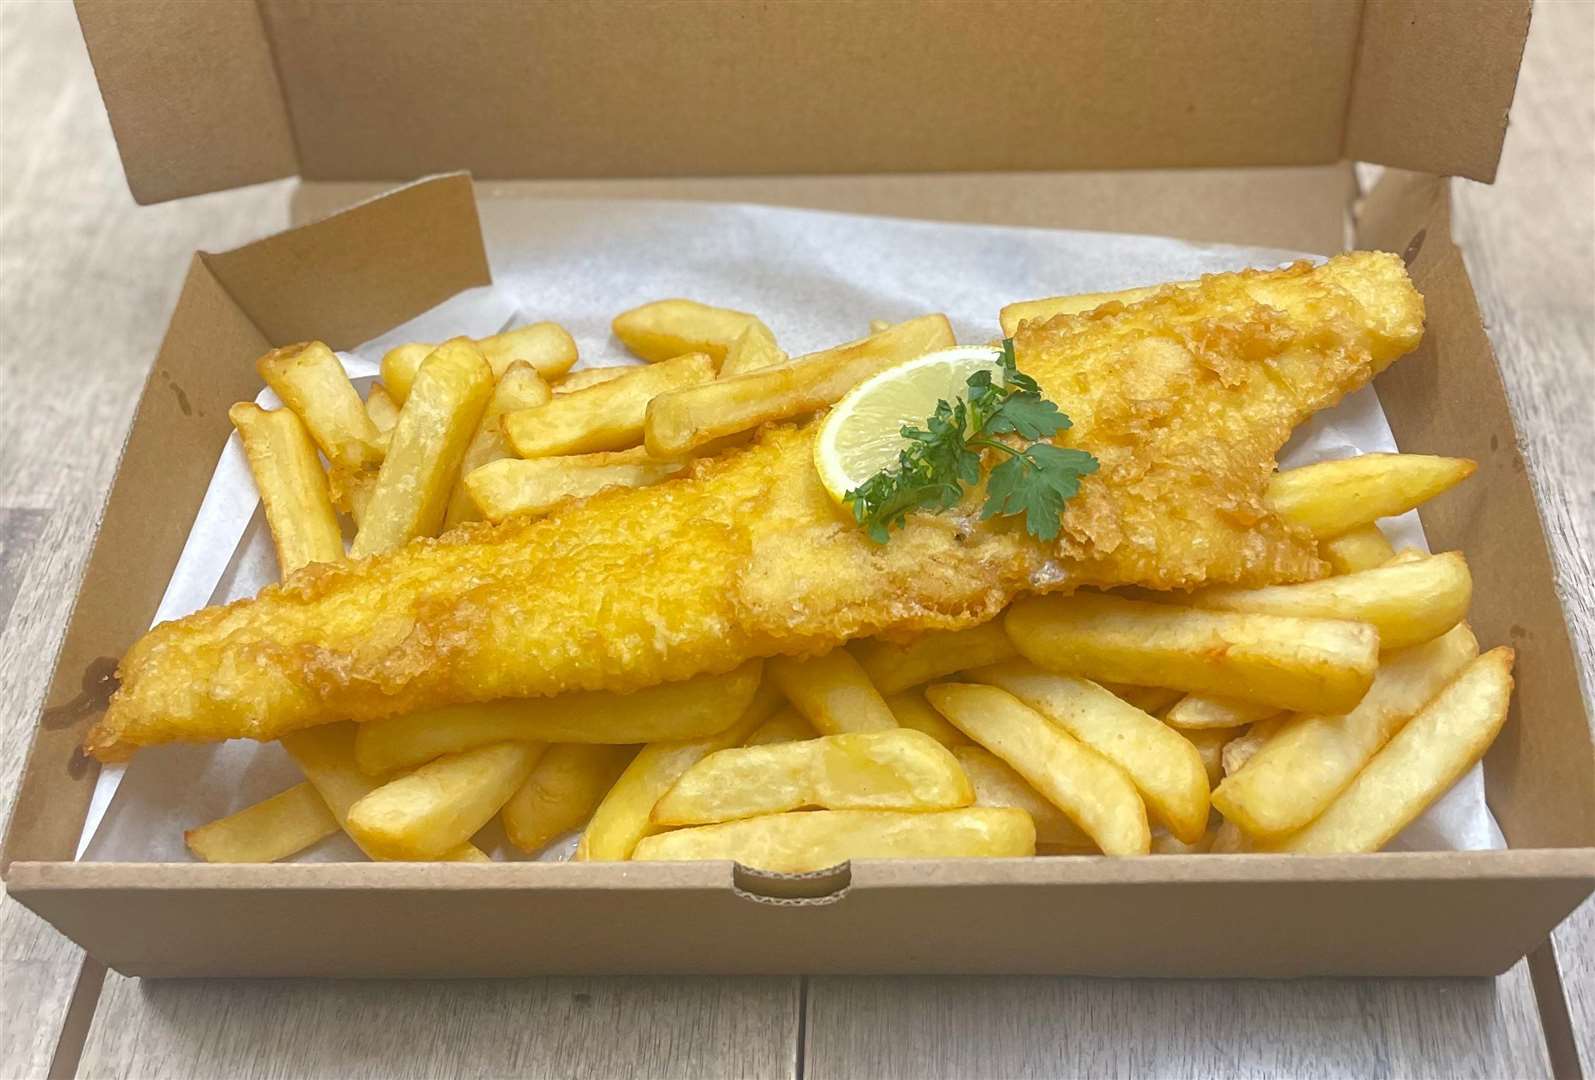 A fish and chip meal served at Lewis's Fish & Grill in Maidstone